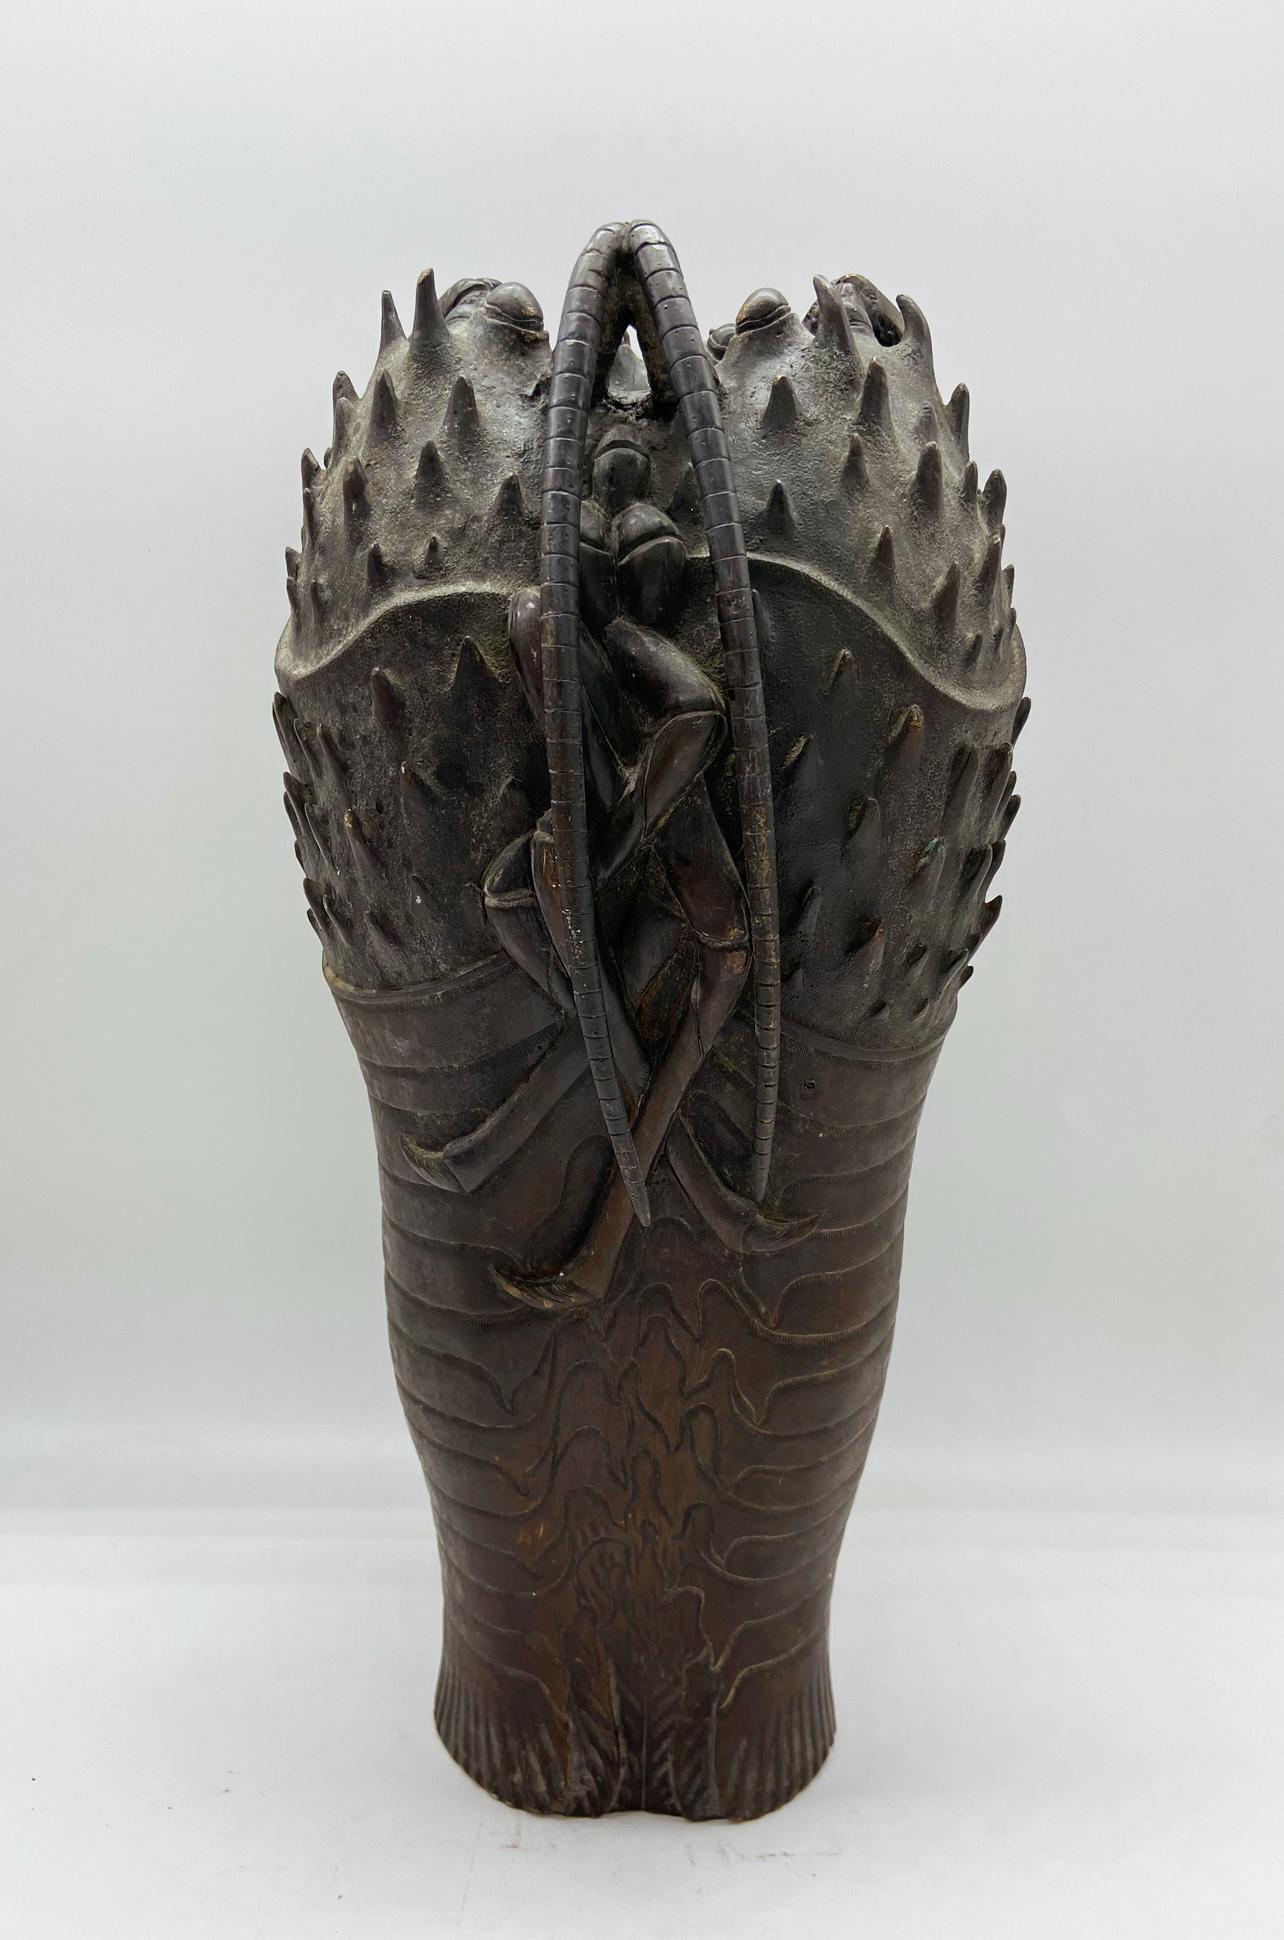 Antique Japanese Meiji period bronze lobster vase. Composed of three stylized lobsters in fabulous detail.